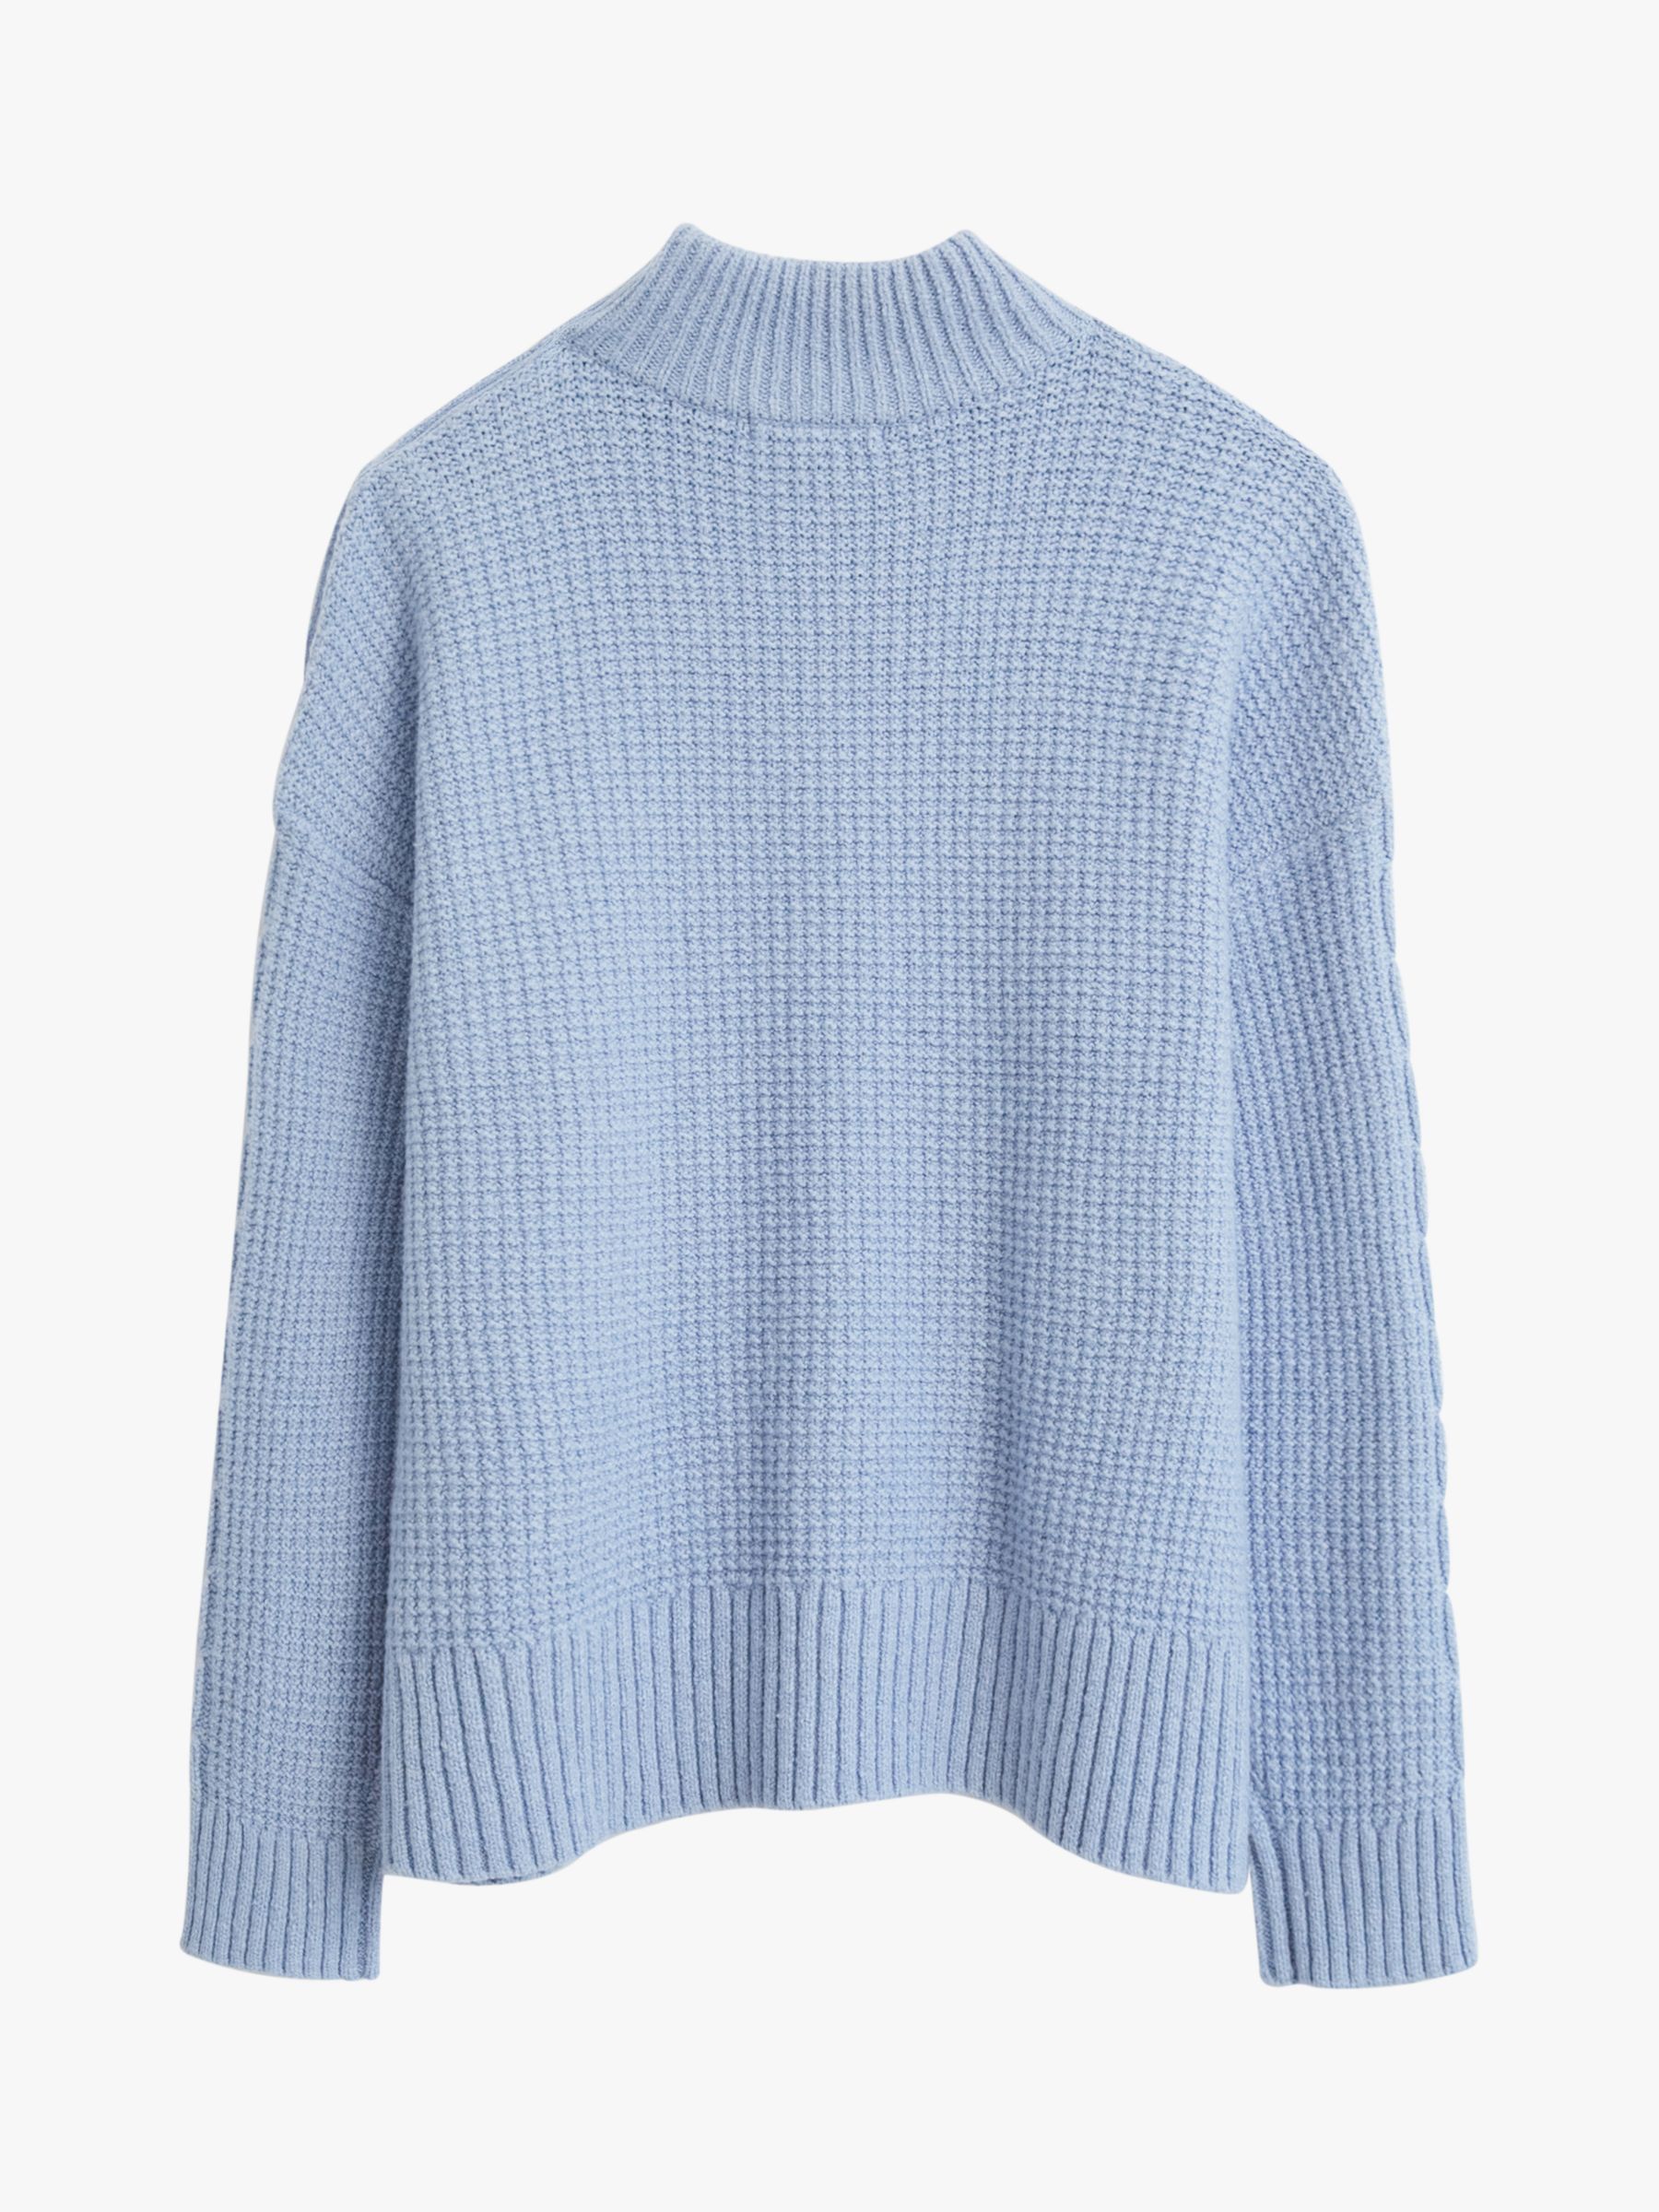 White Stuff Clary Cable Knit Jumper, Light Blue